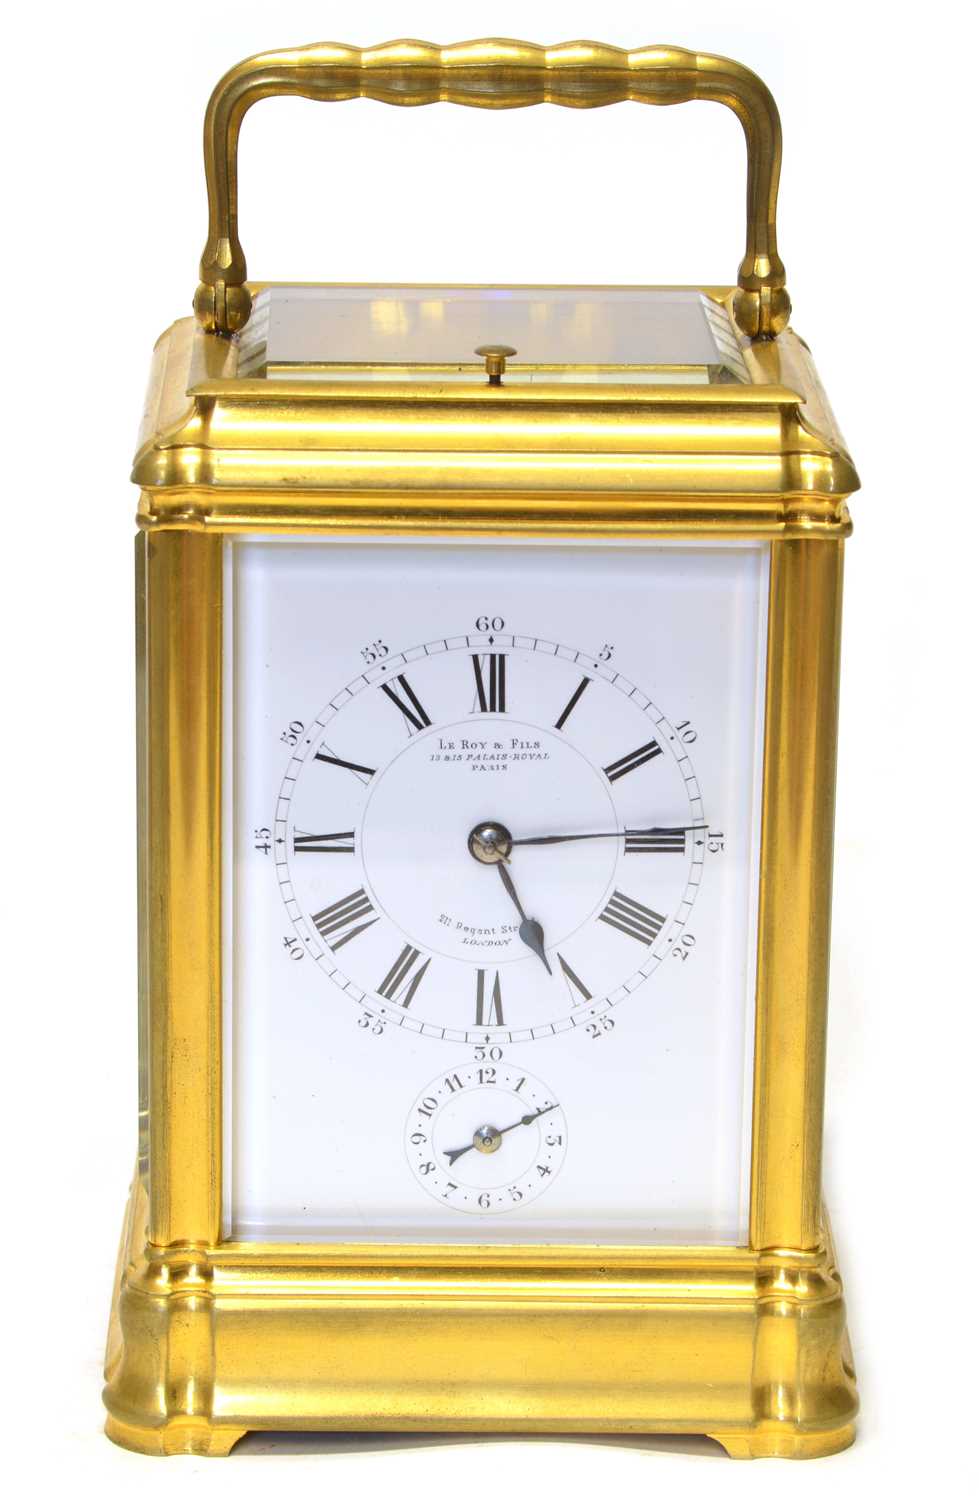 An expert's guide to buying antique carriage clocks  | The  home of art and antiques auctions